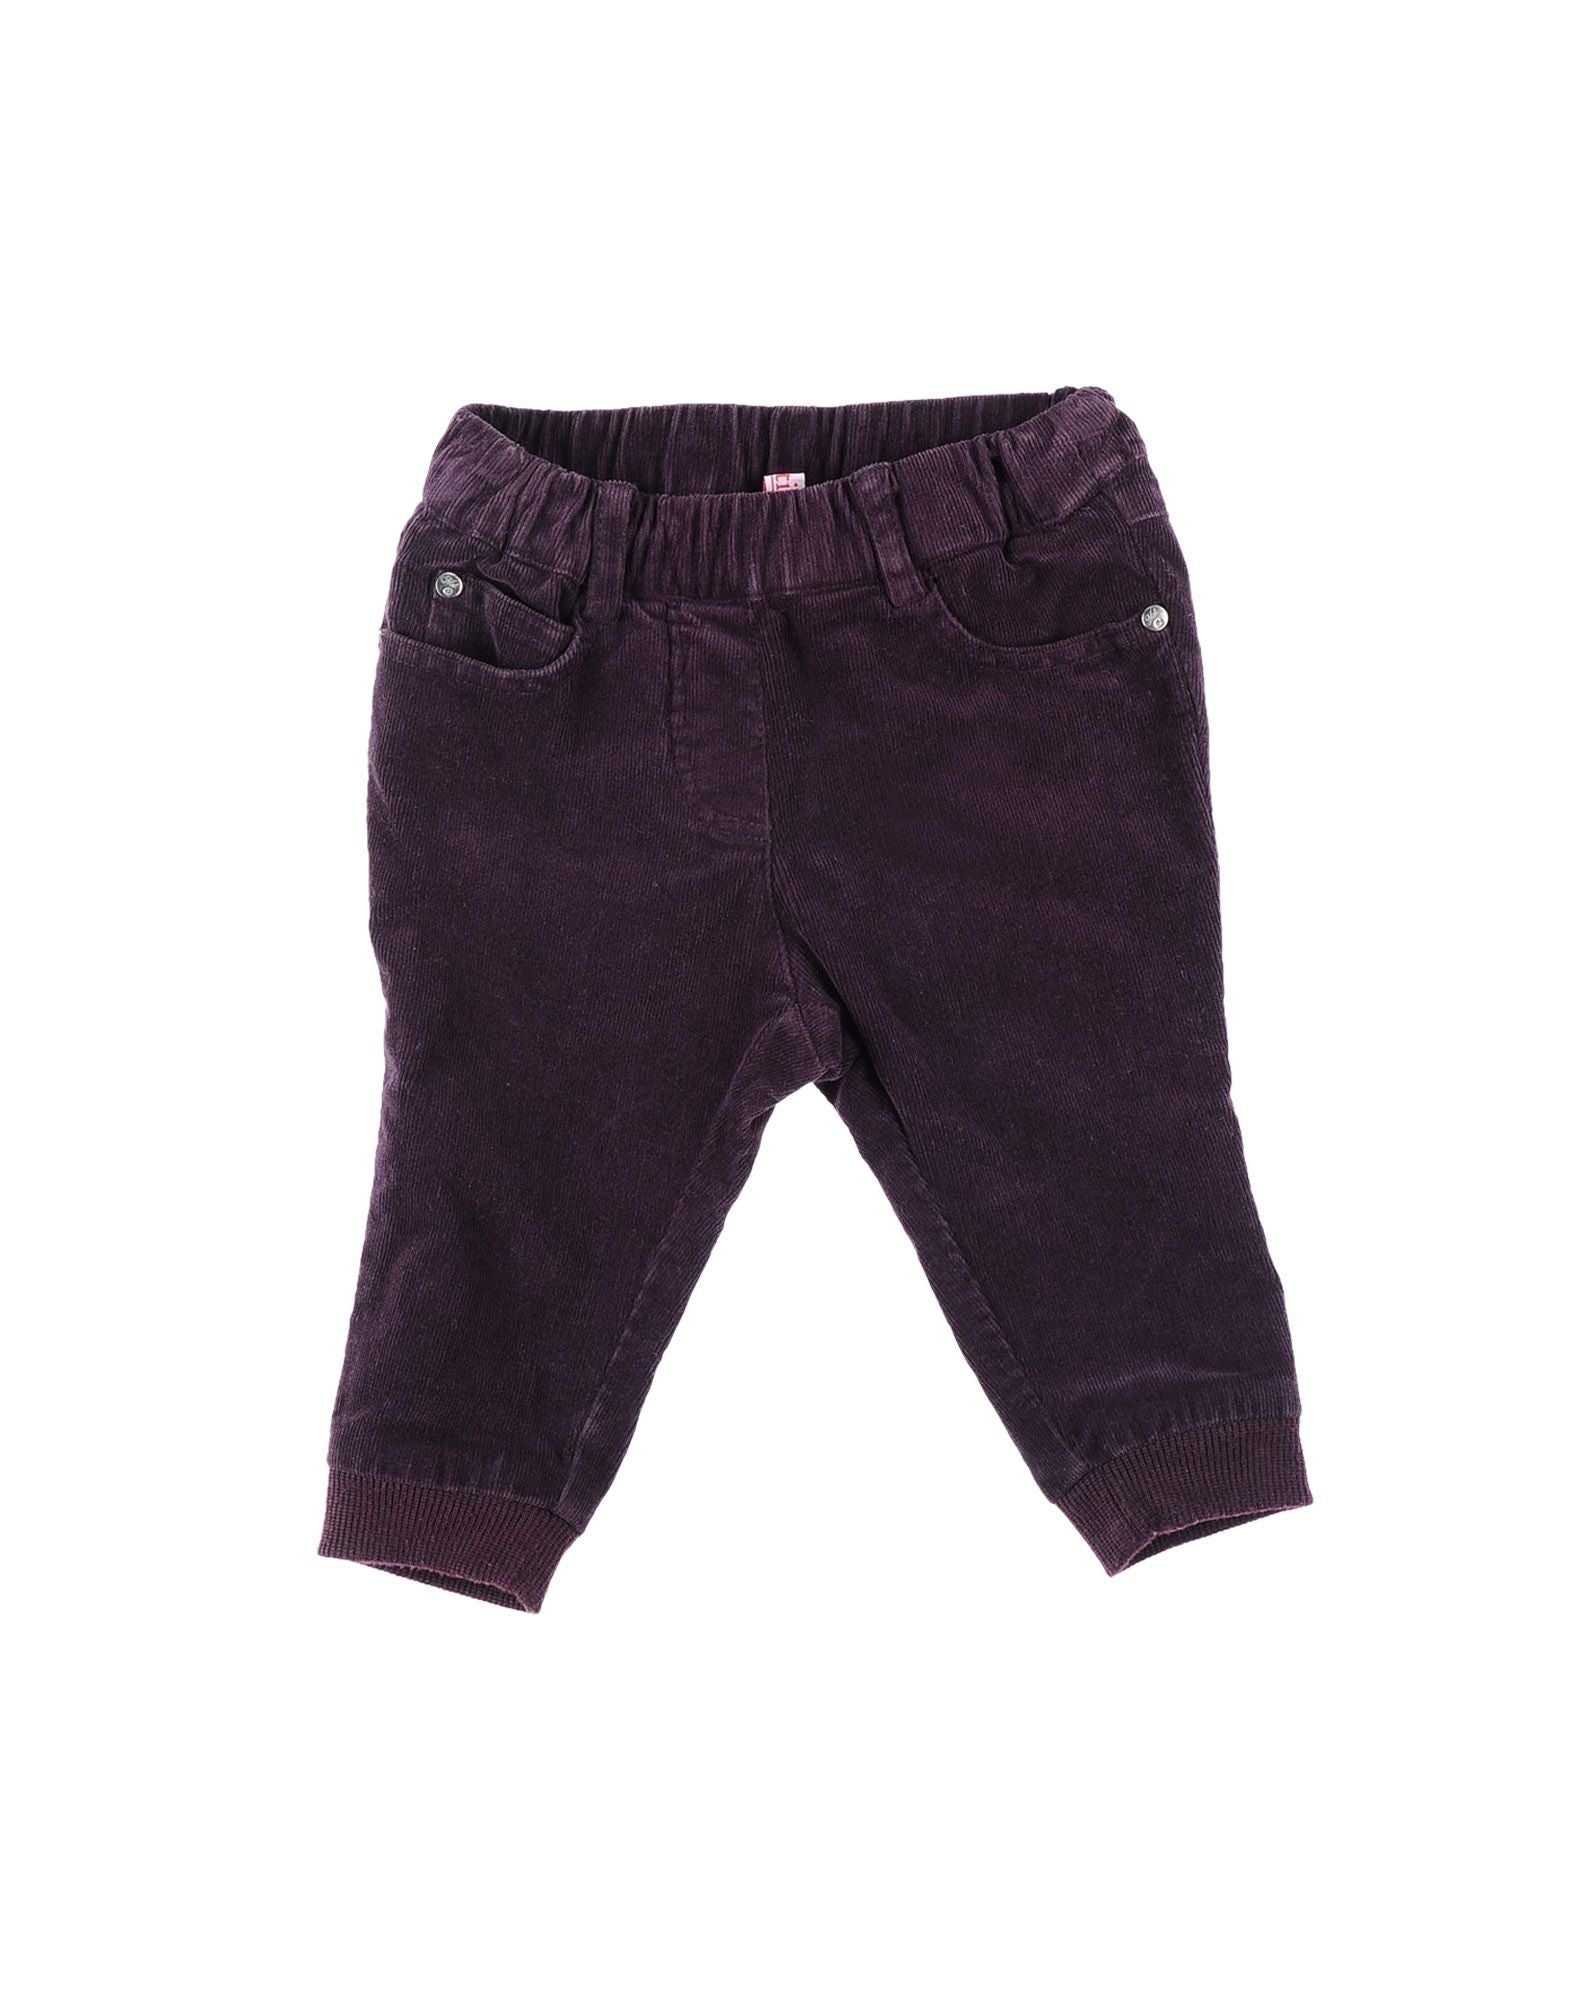 
  Velvet trousers from the Mirtillo girl's clothing line, model five
  bag pockets, with elastic...